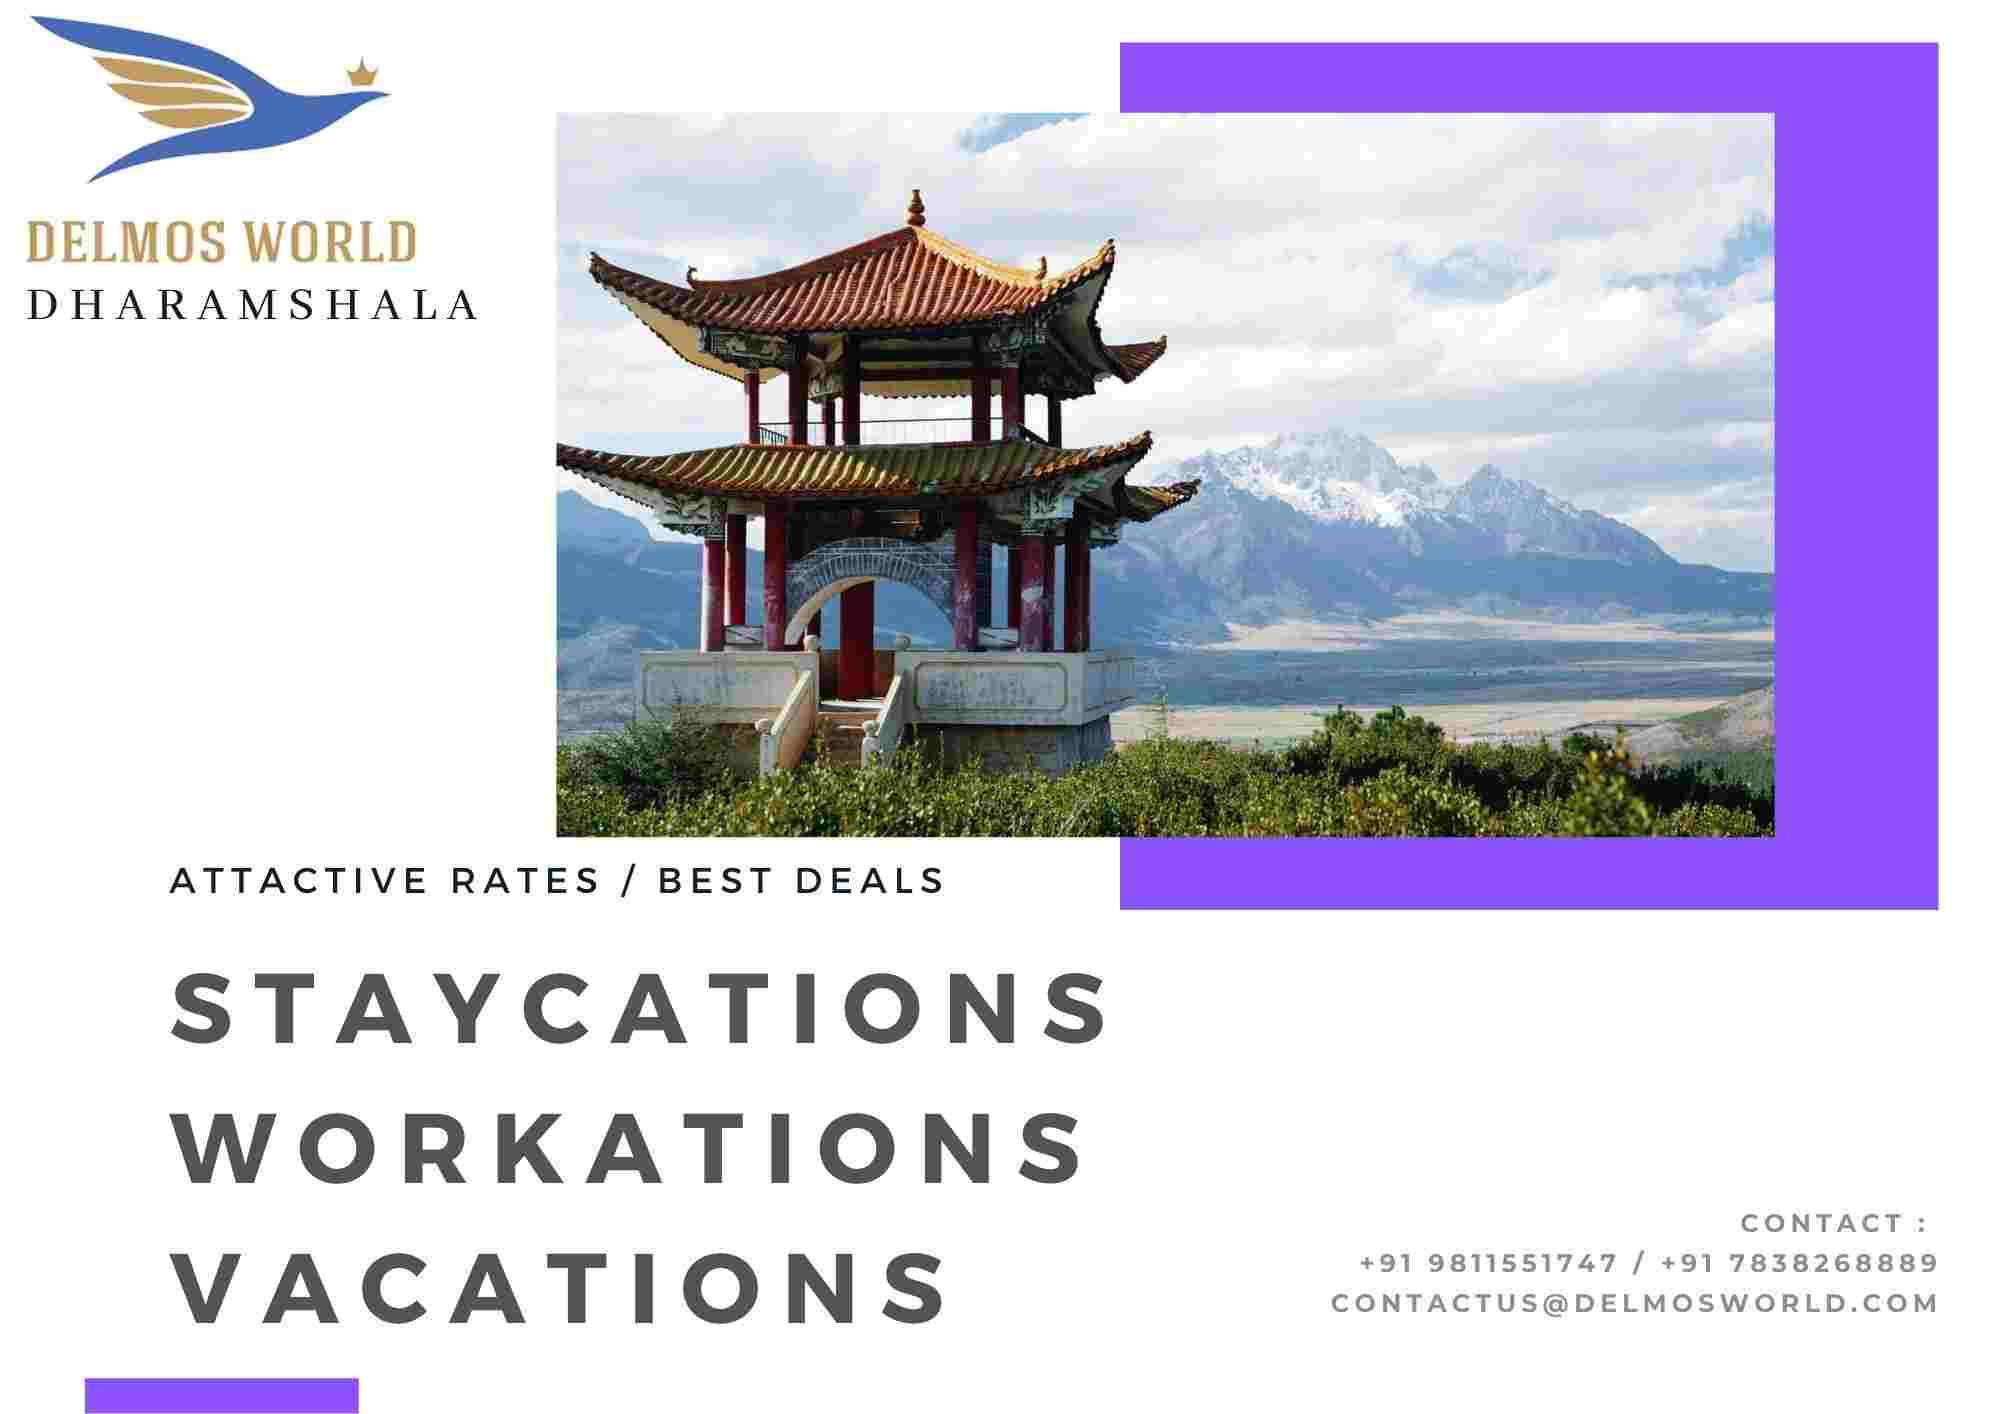 Dharamshala Staycations, Workations, Vacations